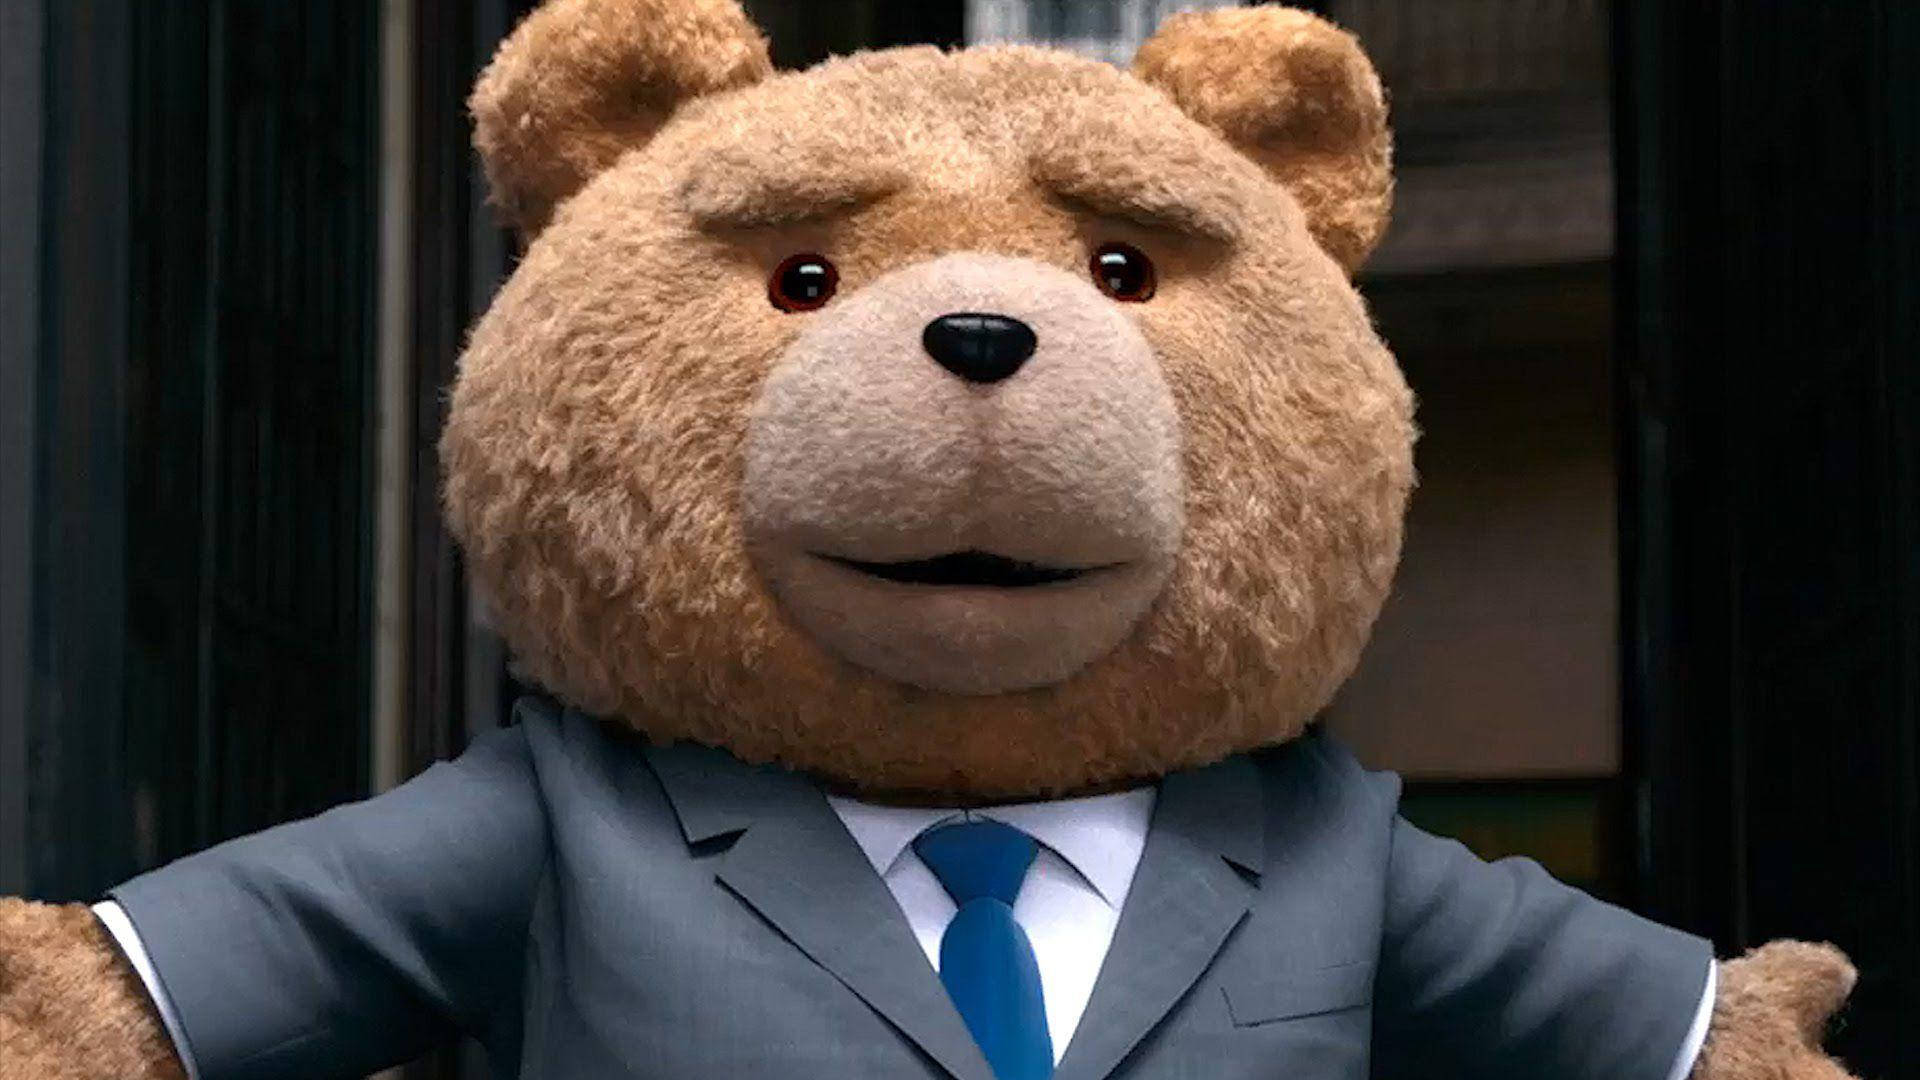 Ted In A Suit Background